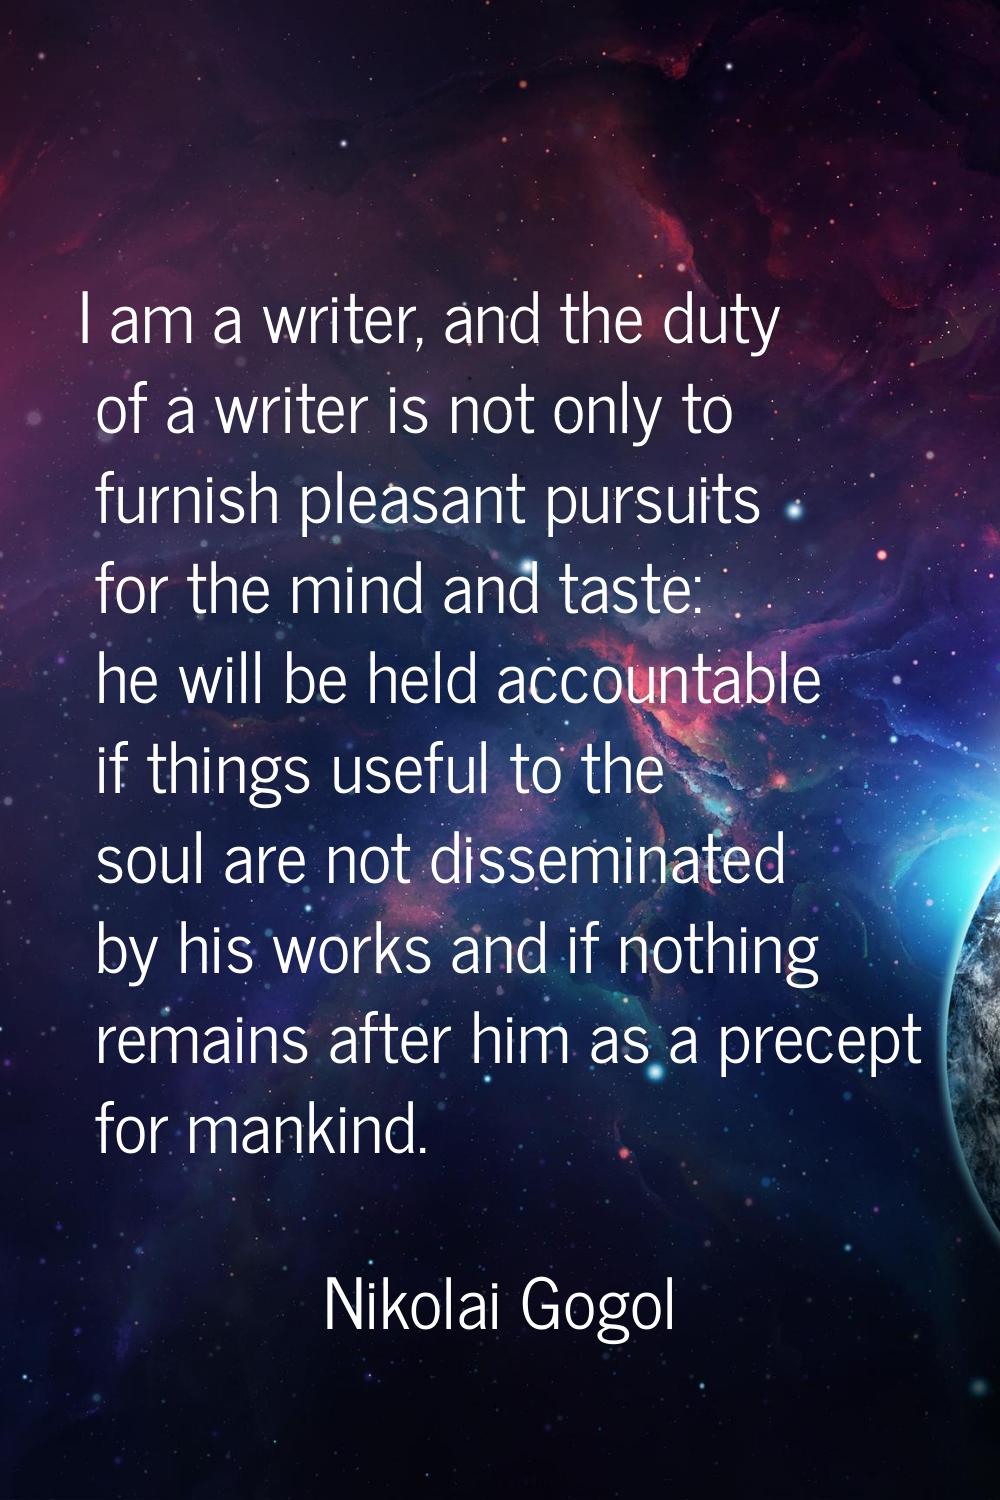 I am a writer, and the duty of a writer is not only to furnish pleasant pursuits for the mind and t